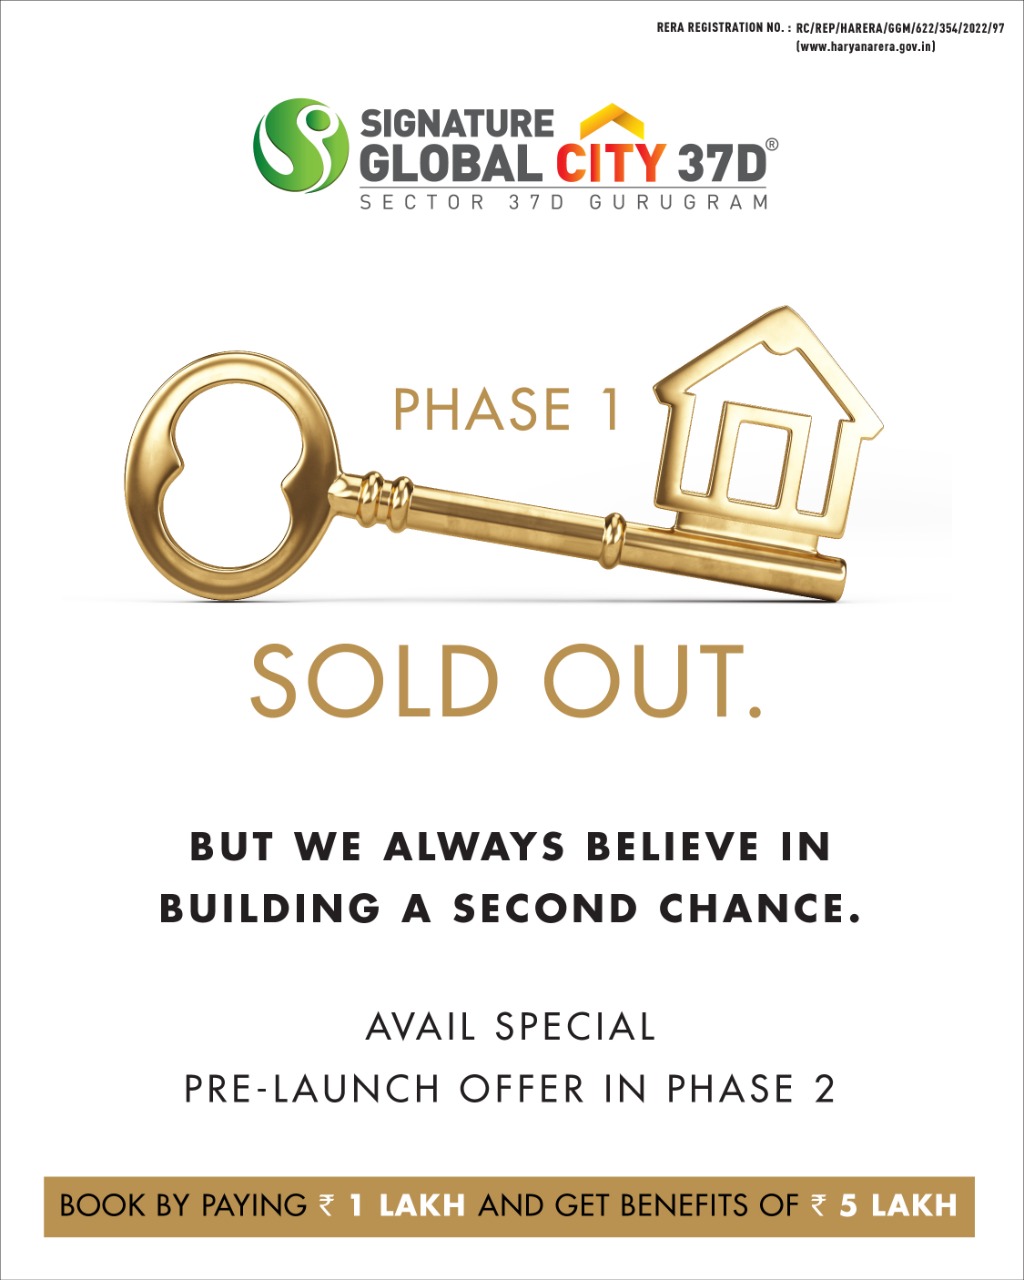 Phase 1 sold out at Signature Global City 37D, Gurgaon Update